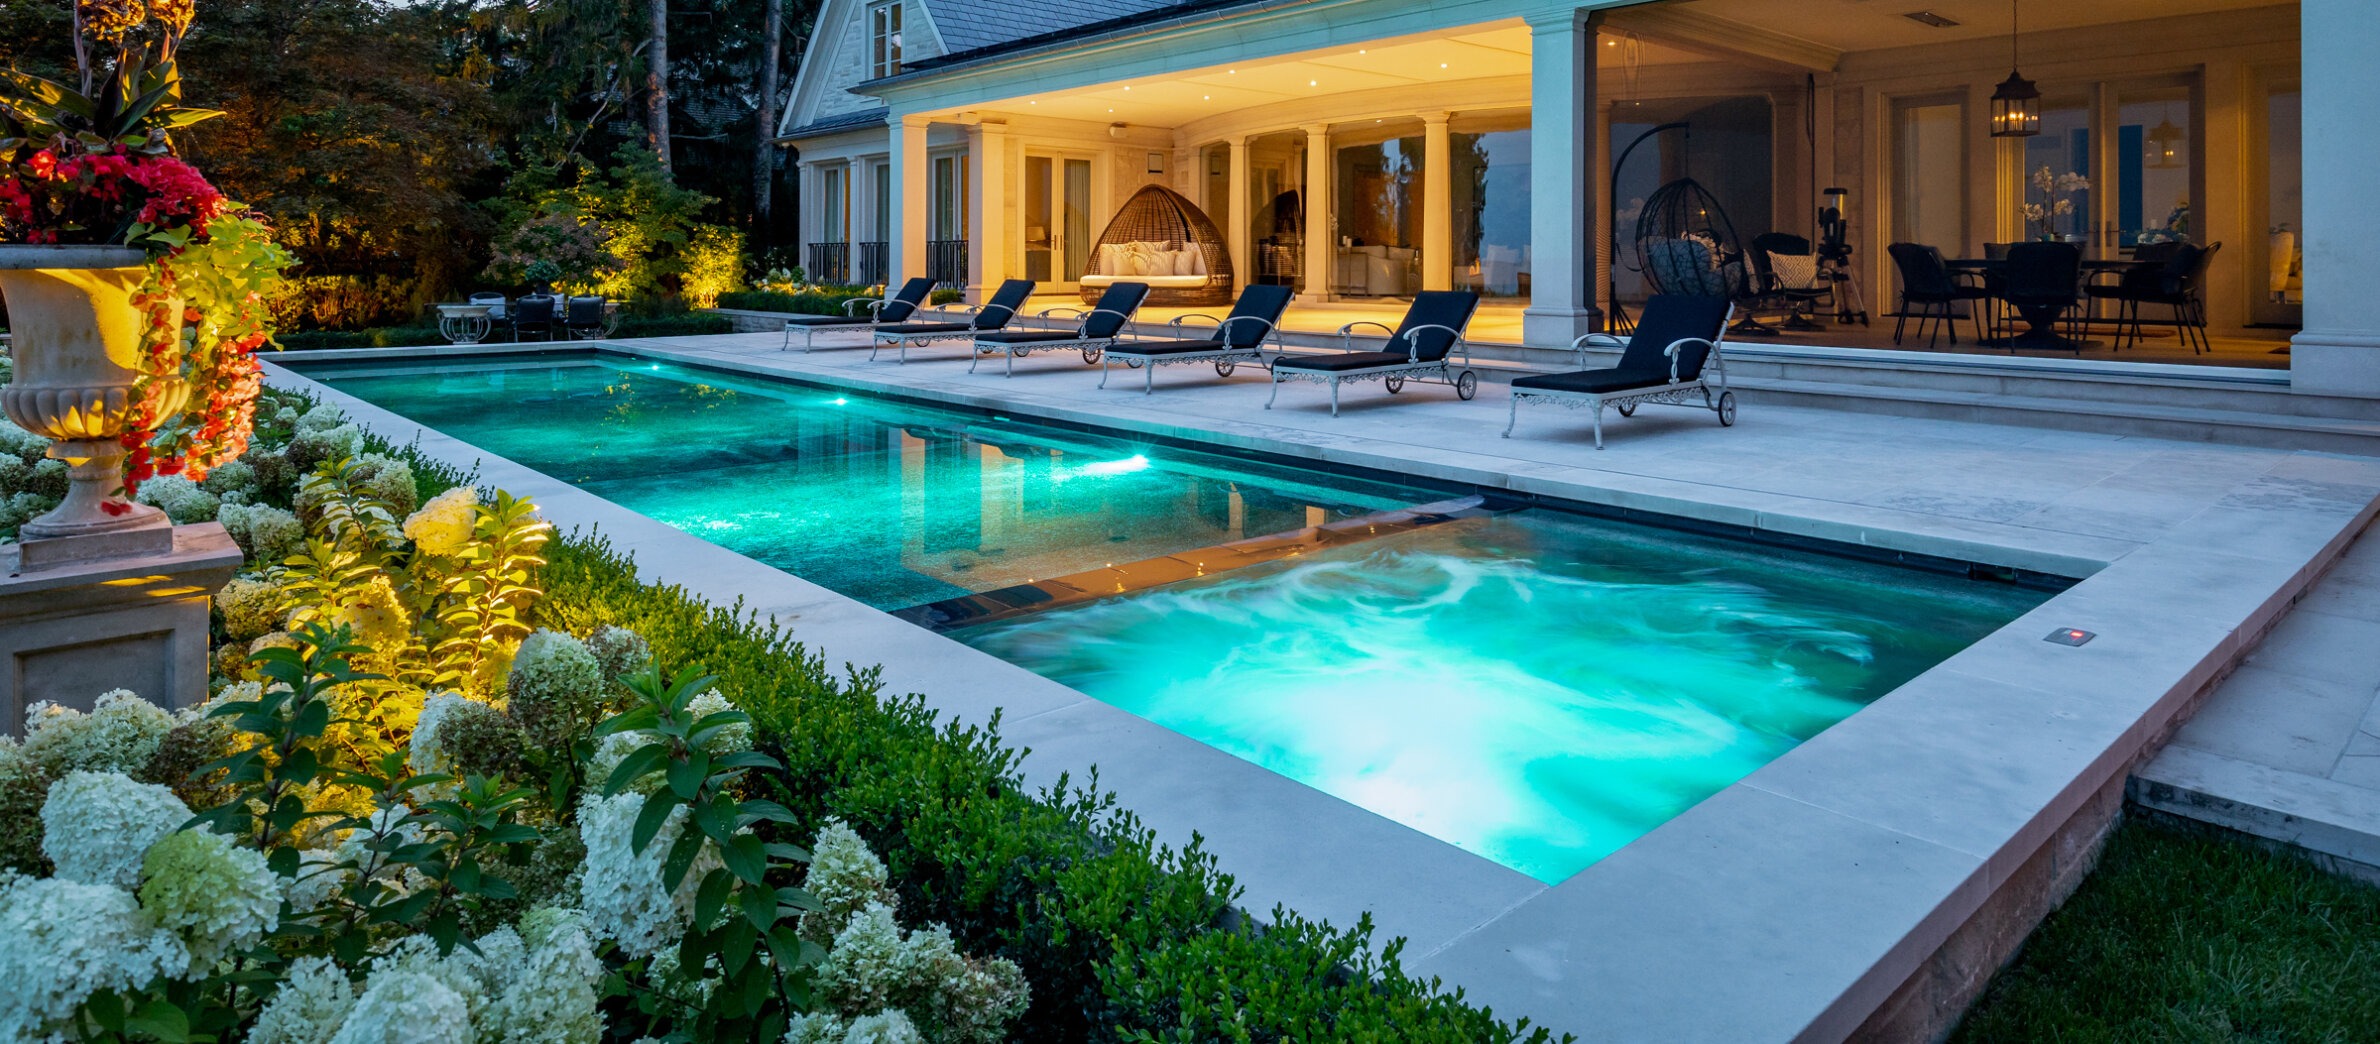 An illuminated swimming pool at dusk, surrounded by lush vegetation, fronting a luxurious house with outdoor seating and a cozy interior visible.